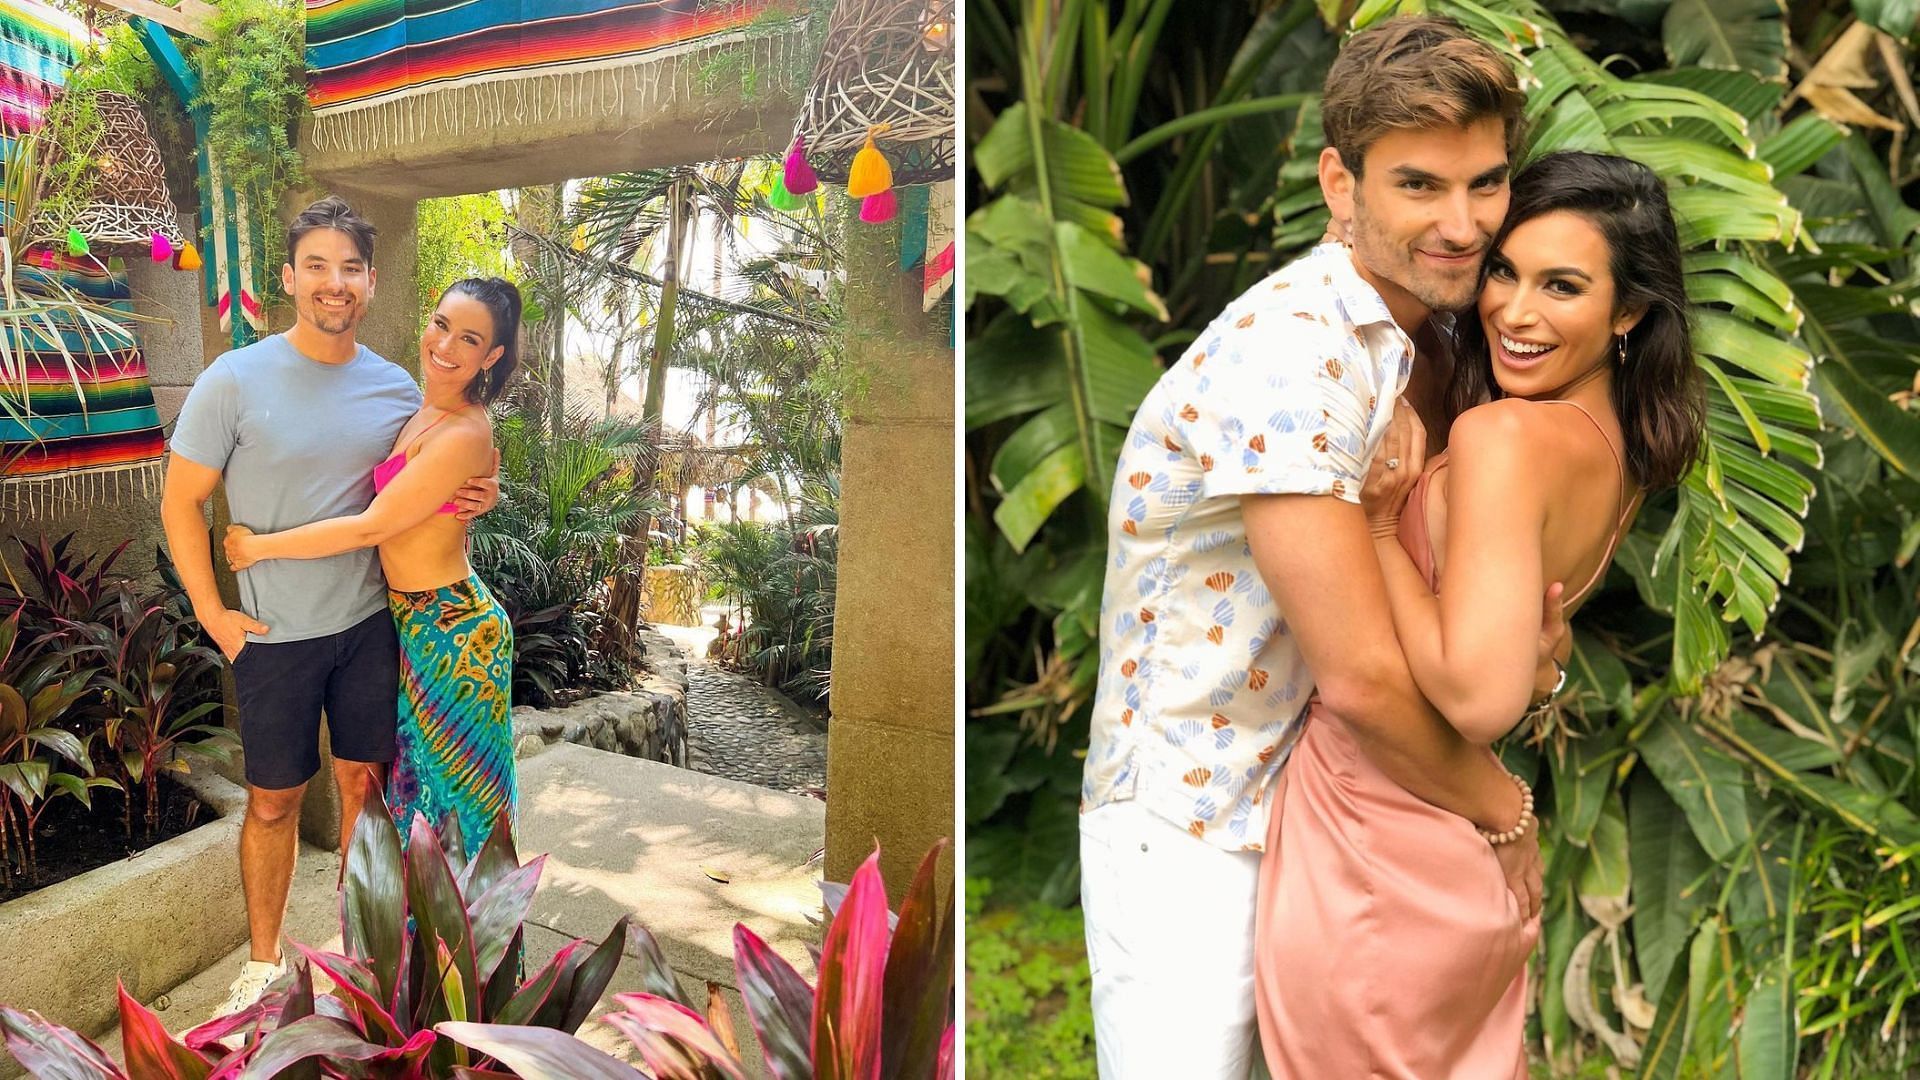 Ashley and Jared are set to make an appearance on Bachelor in Paradise Season 8